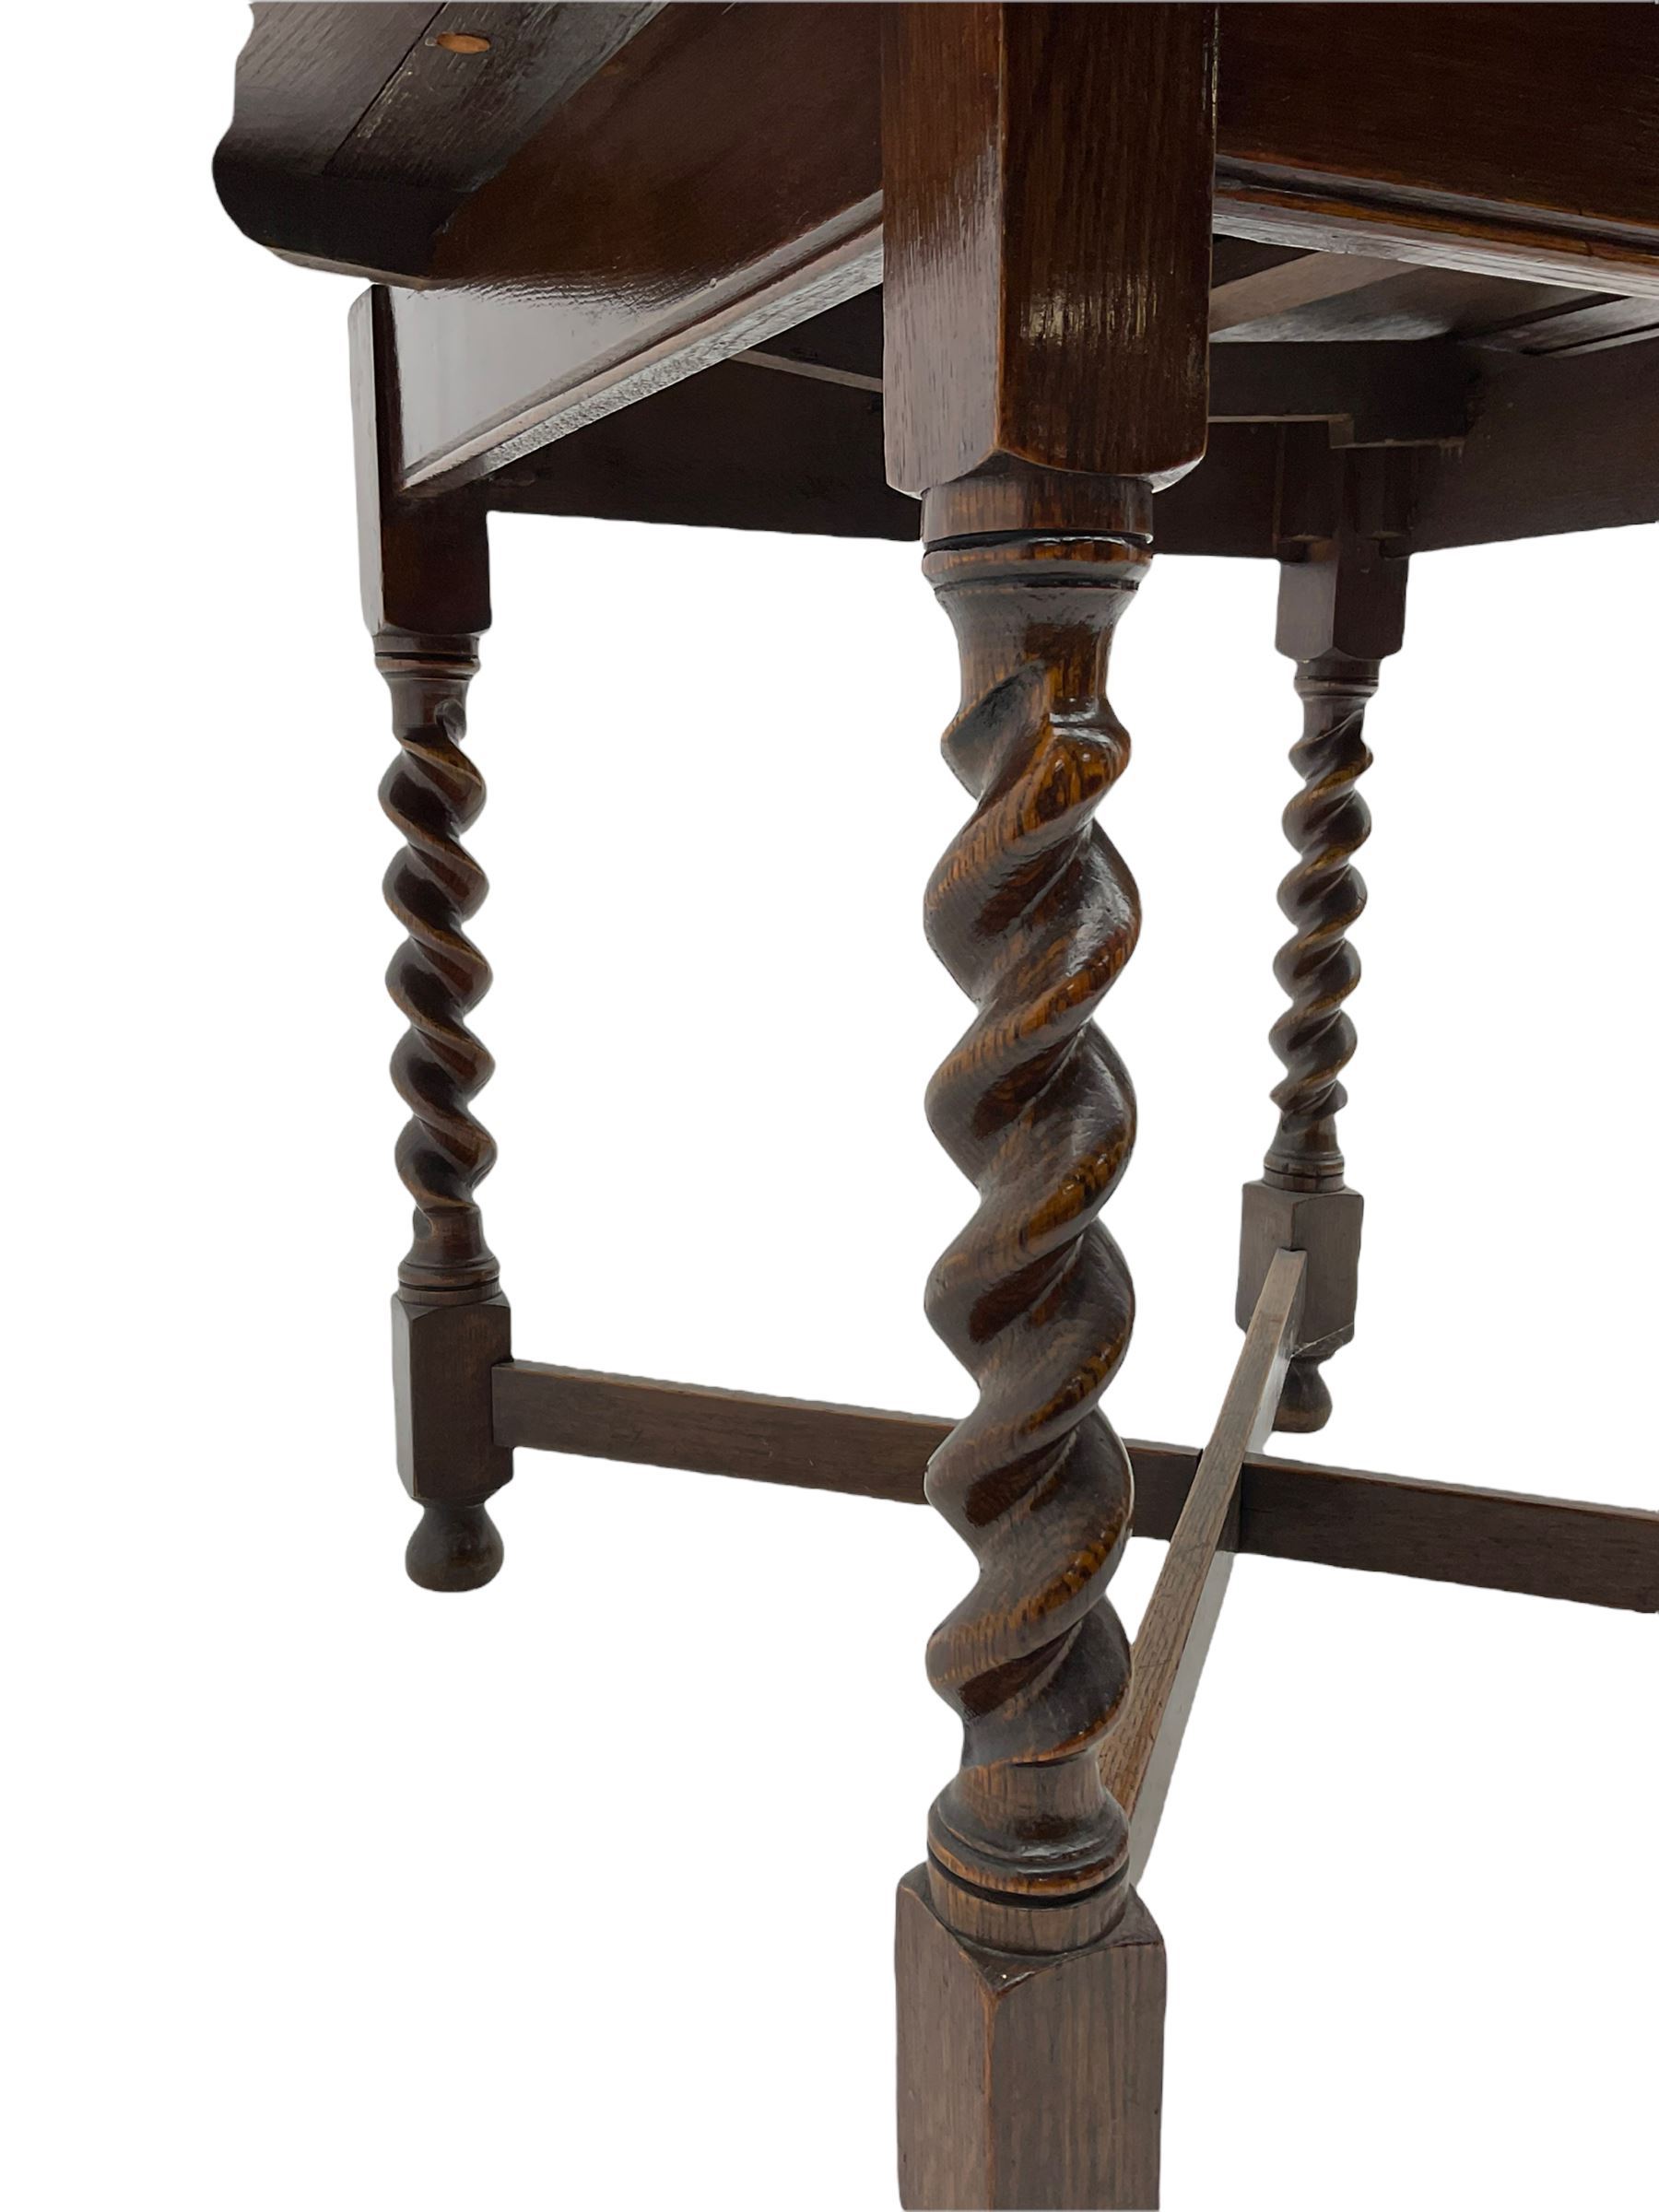 Early 20th century oak barley twist drawer leaf dining table - Image 8 of 10